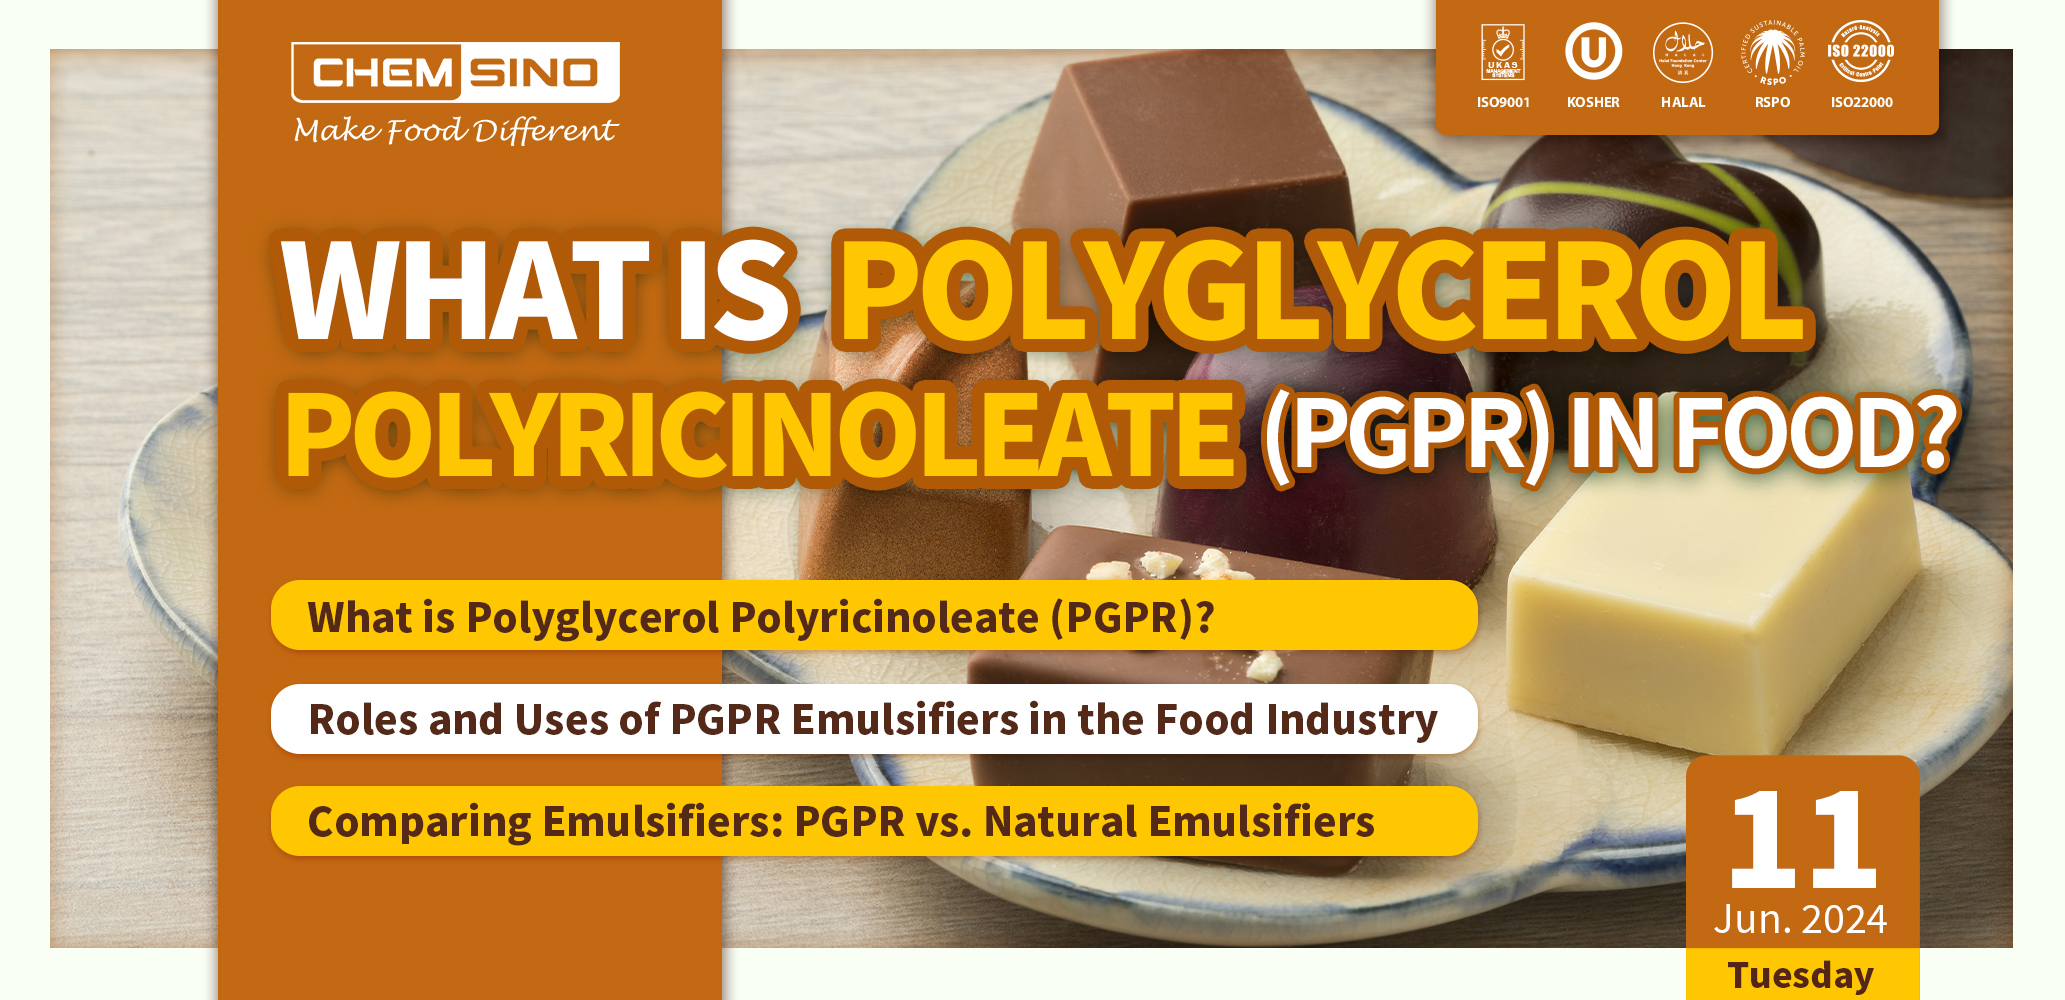 What Is Polyglycerol Polyricinoleate (PGPR) in Food